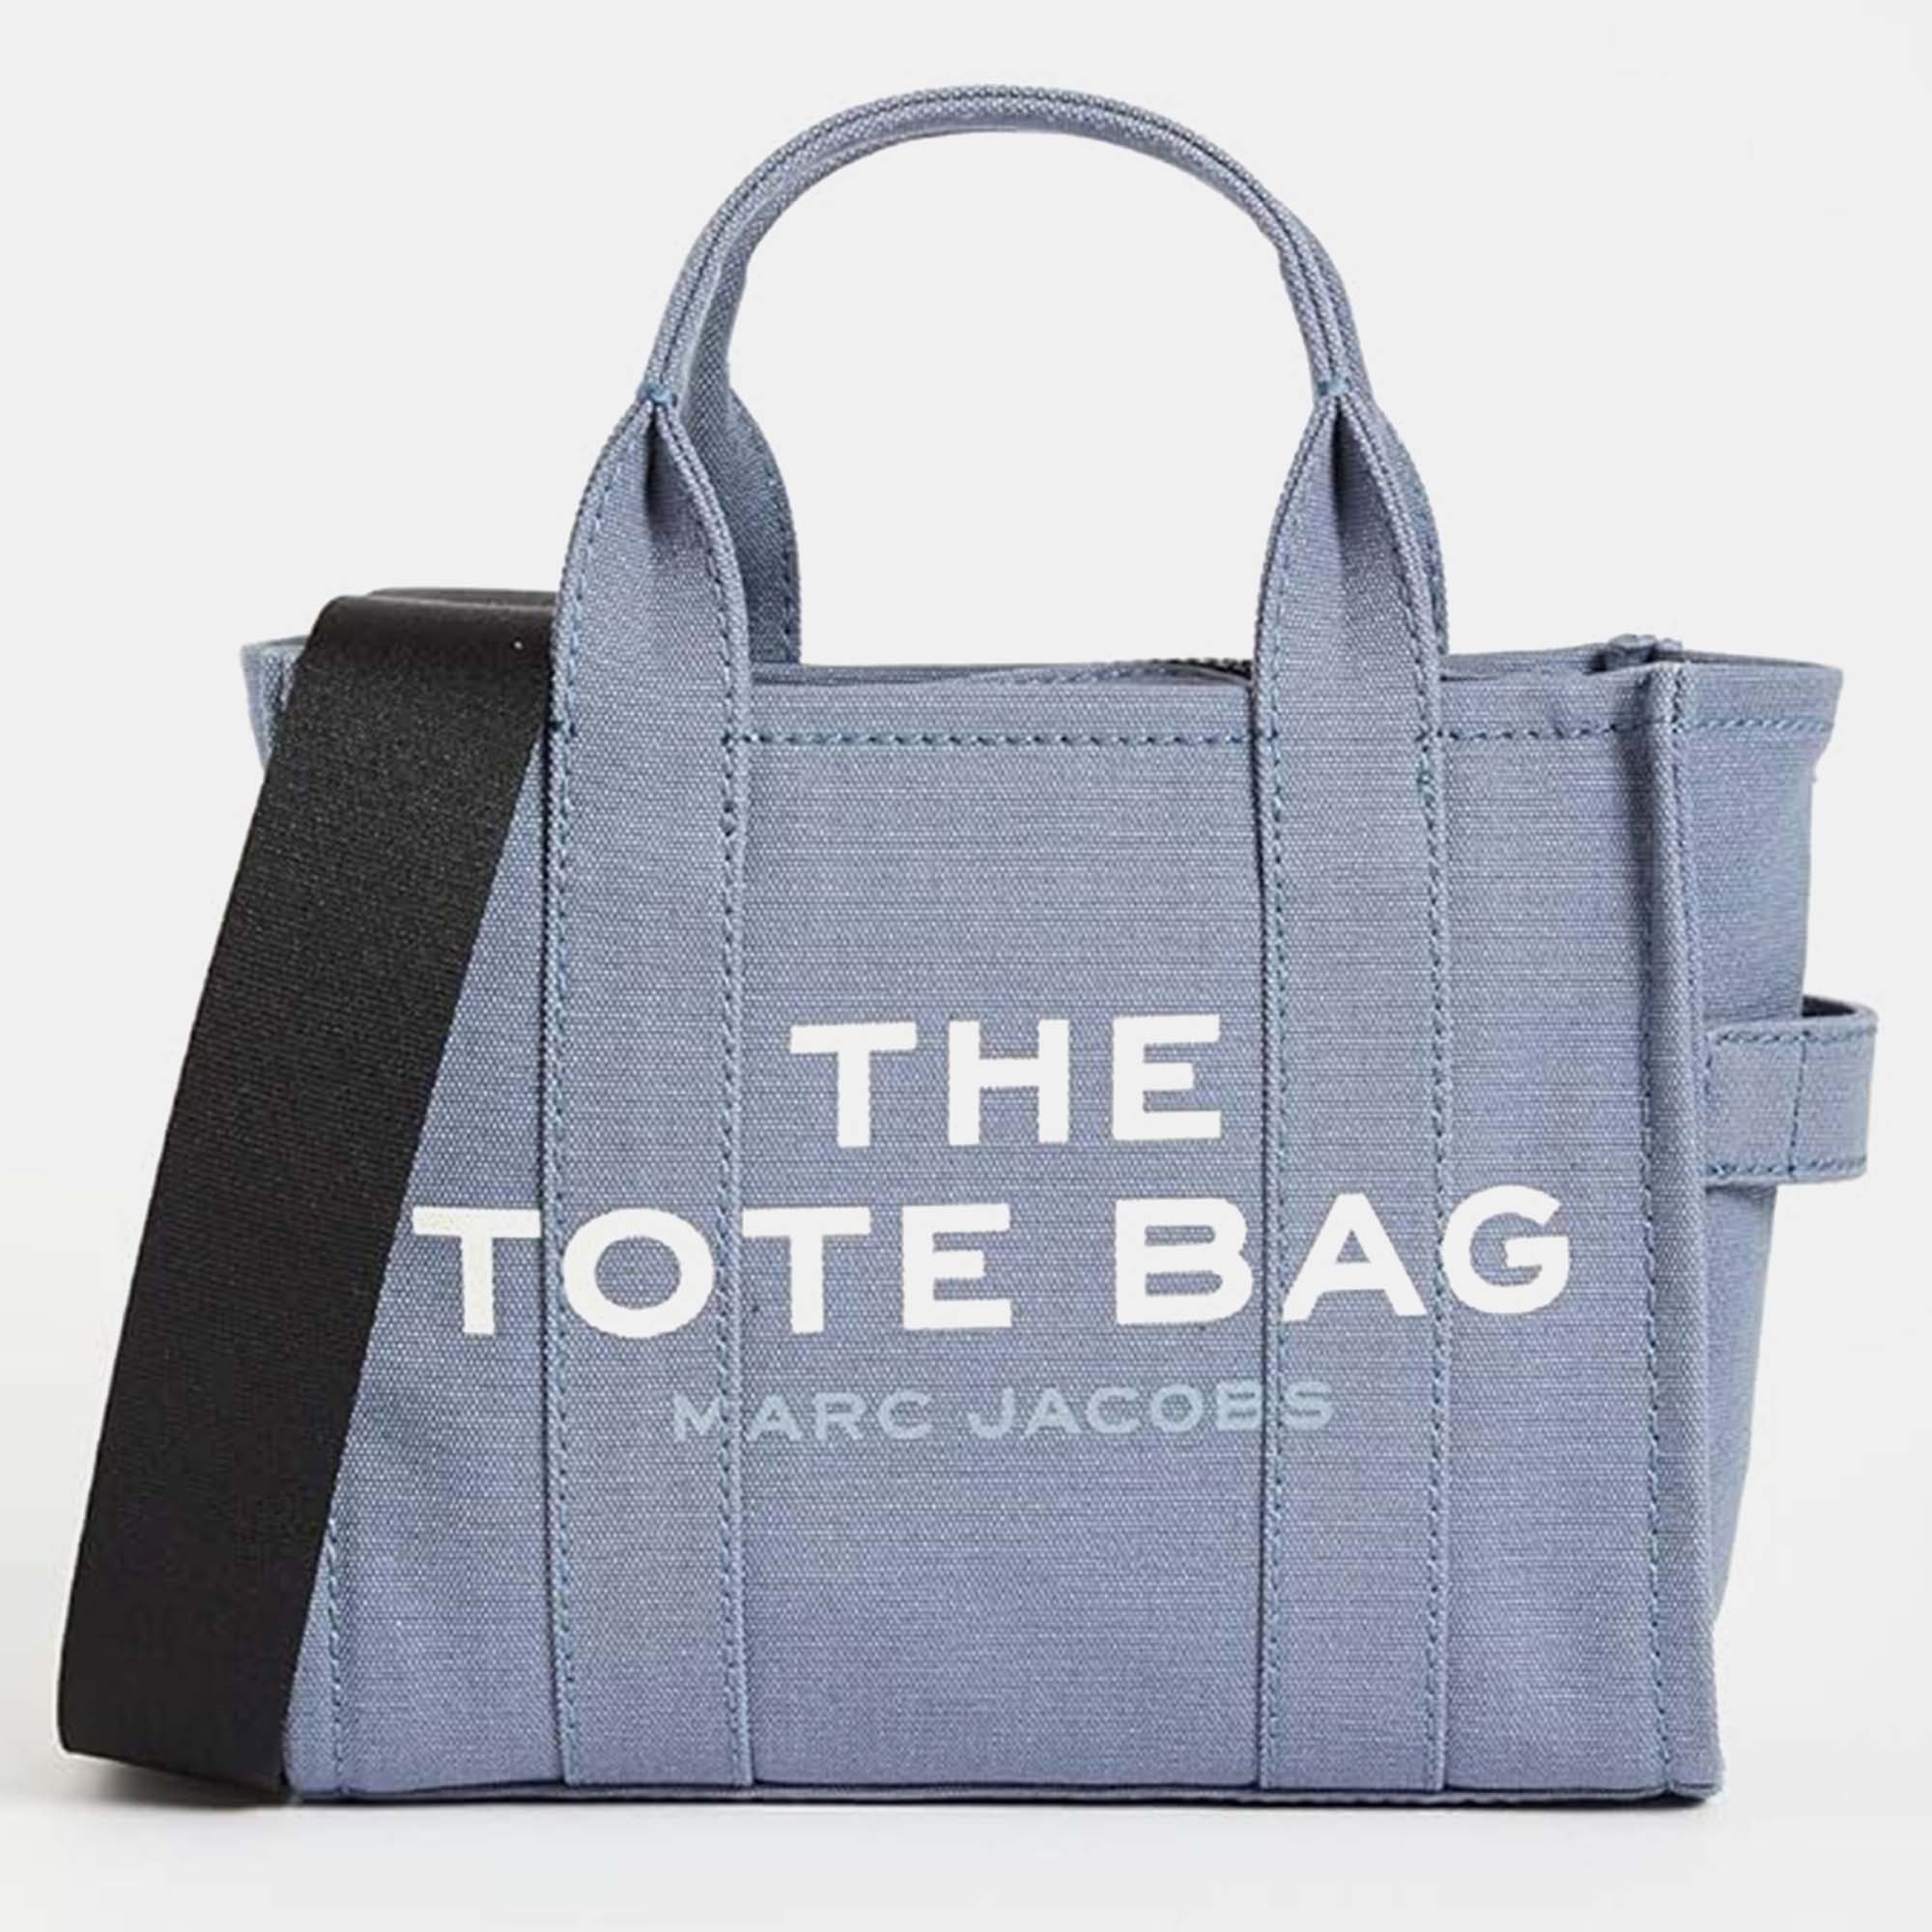 Marc jacobs blue shadow canvas women's the small tote bag